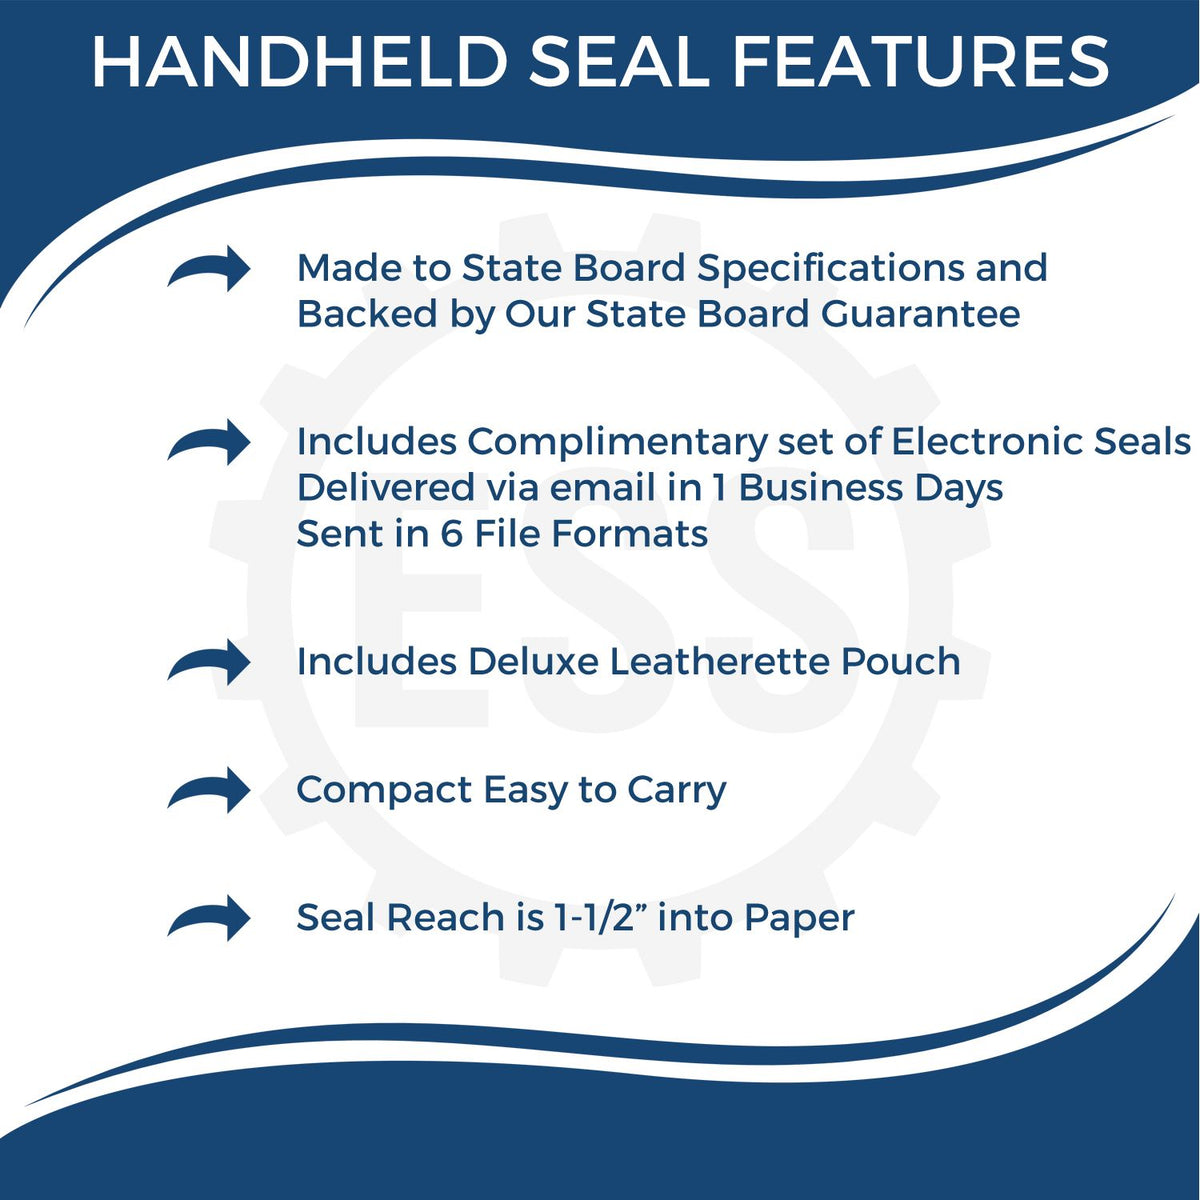 A picture of an infographic highlighting the selling points for the Handheld Hawaii Land Surveyor Seal